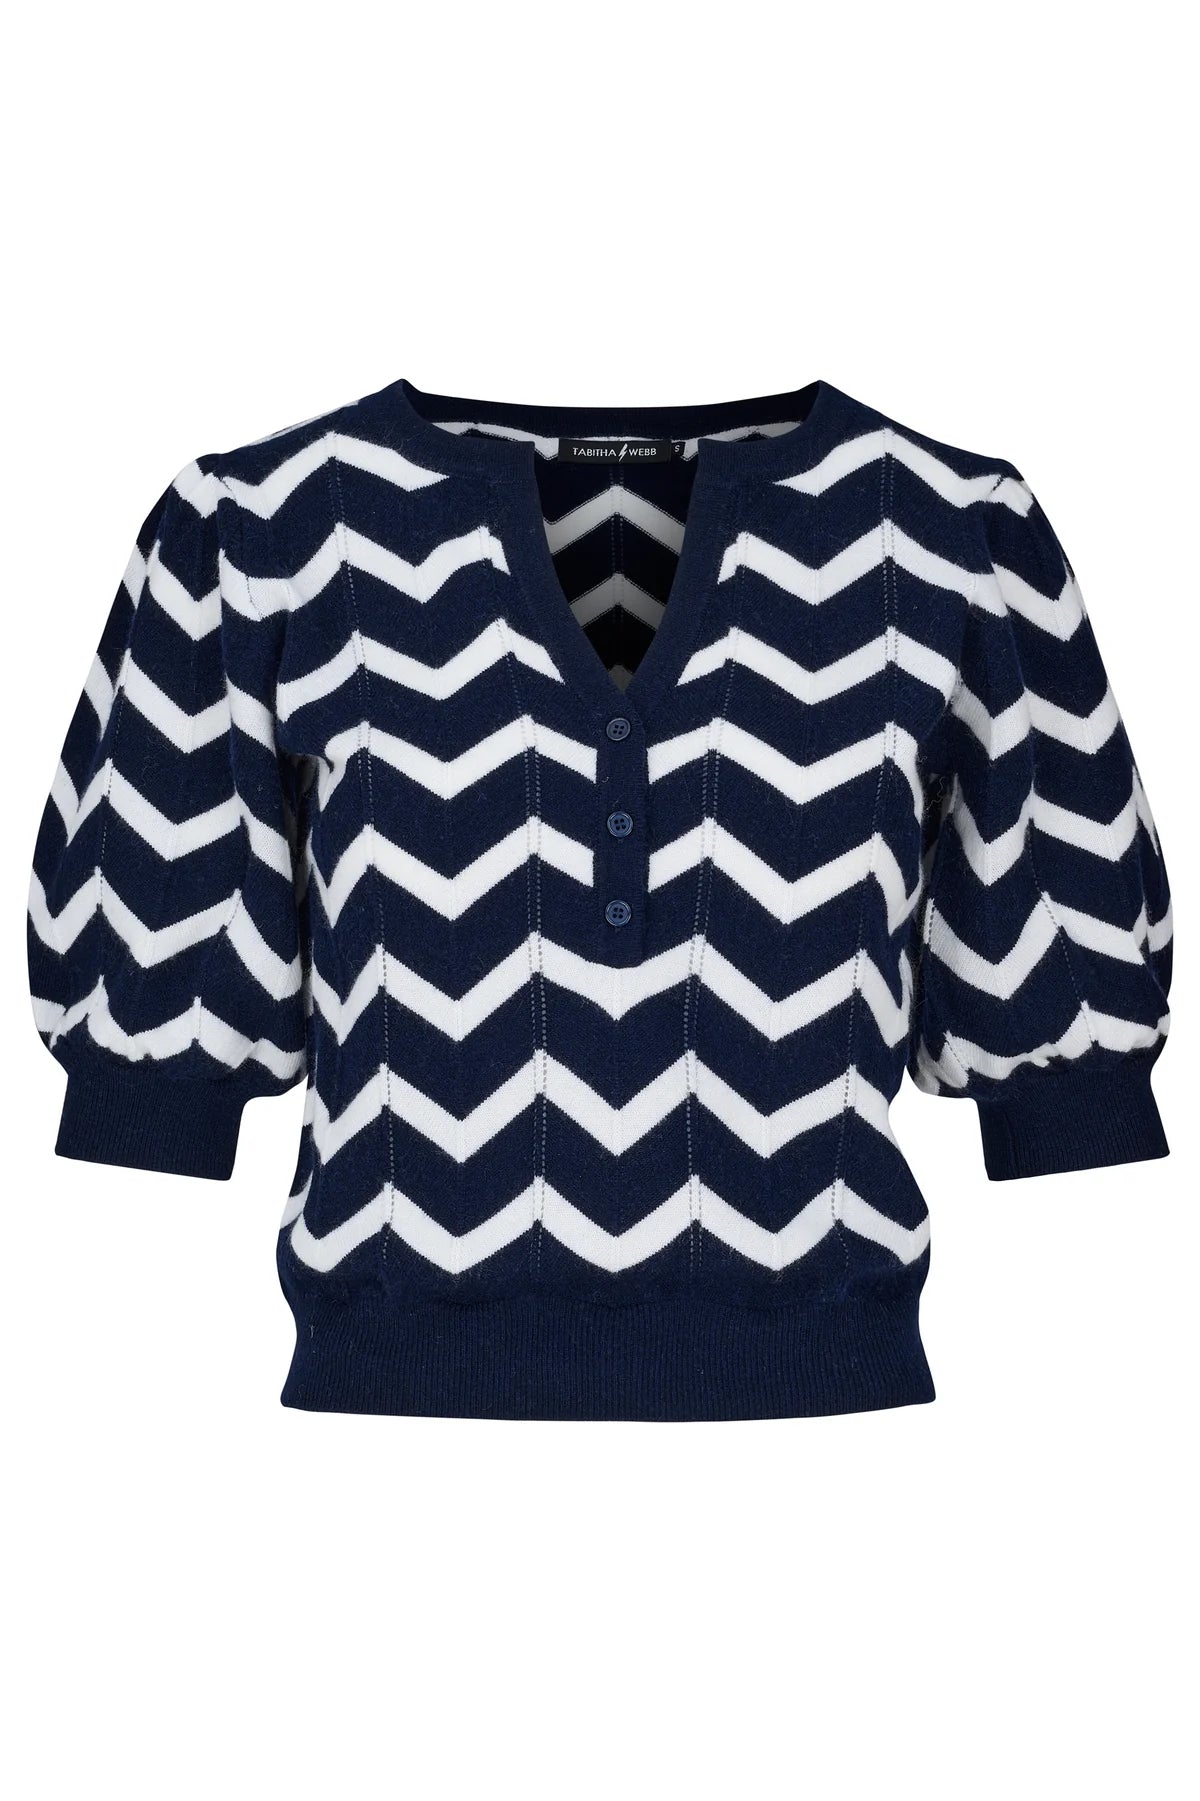 Navy short sleeved knitted jumper with half placket and white chevron throughout